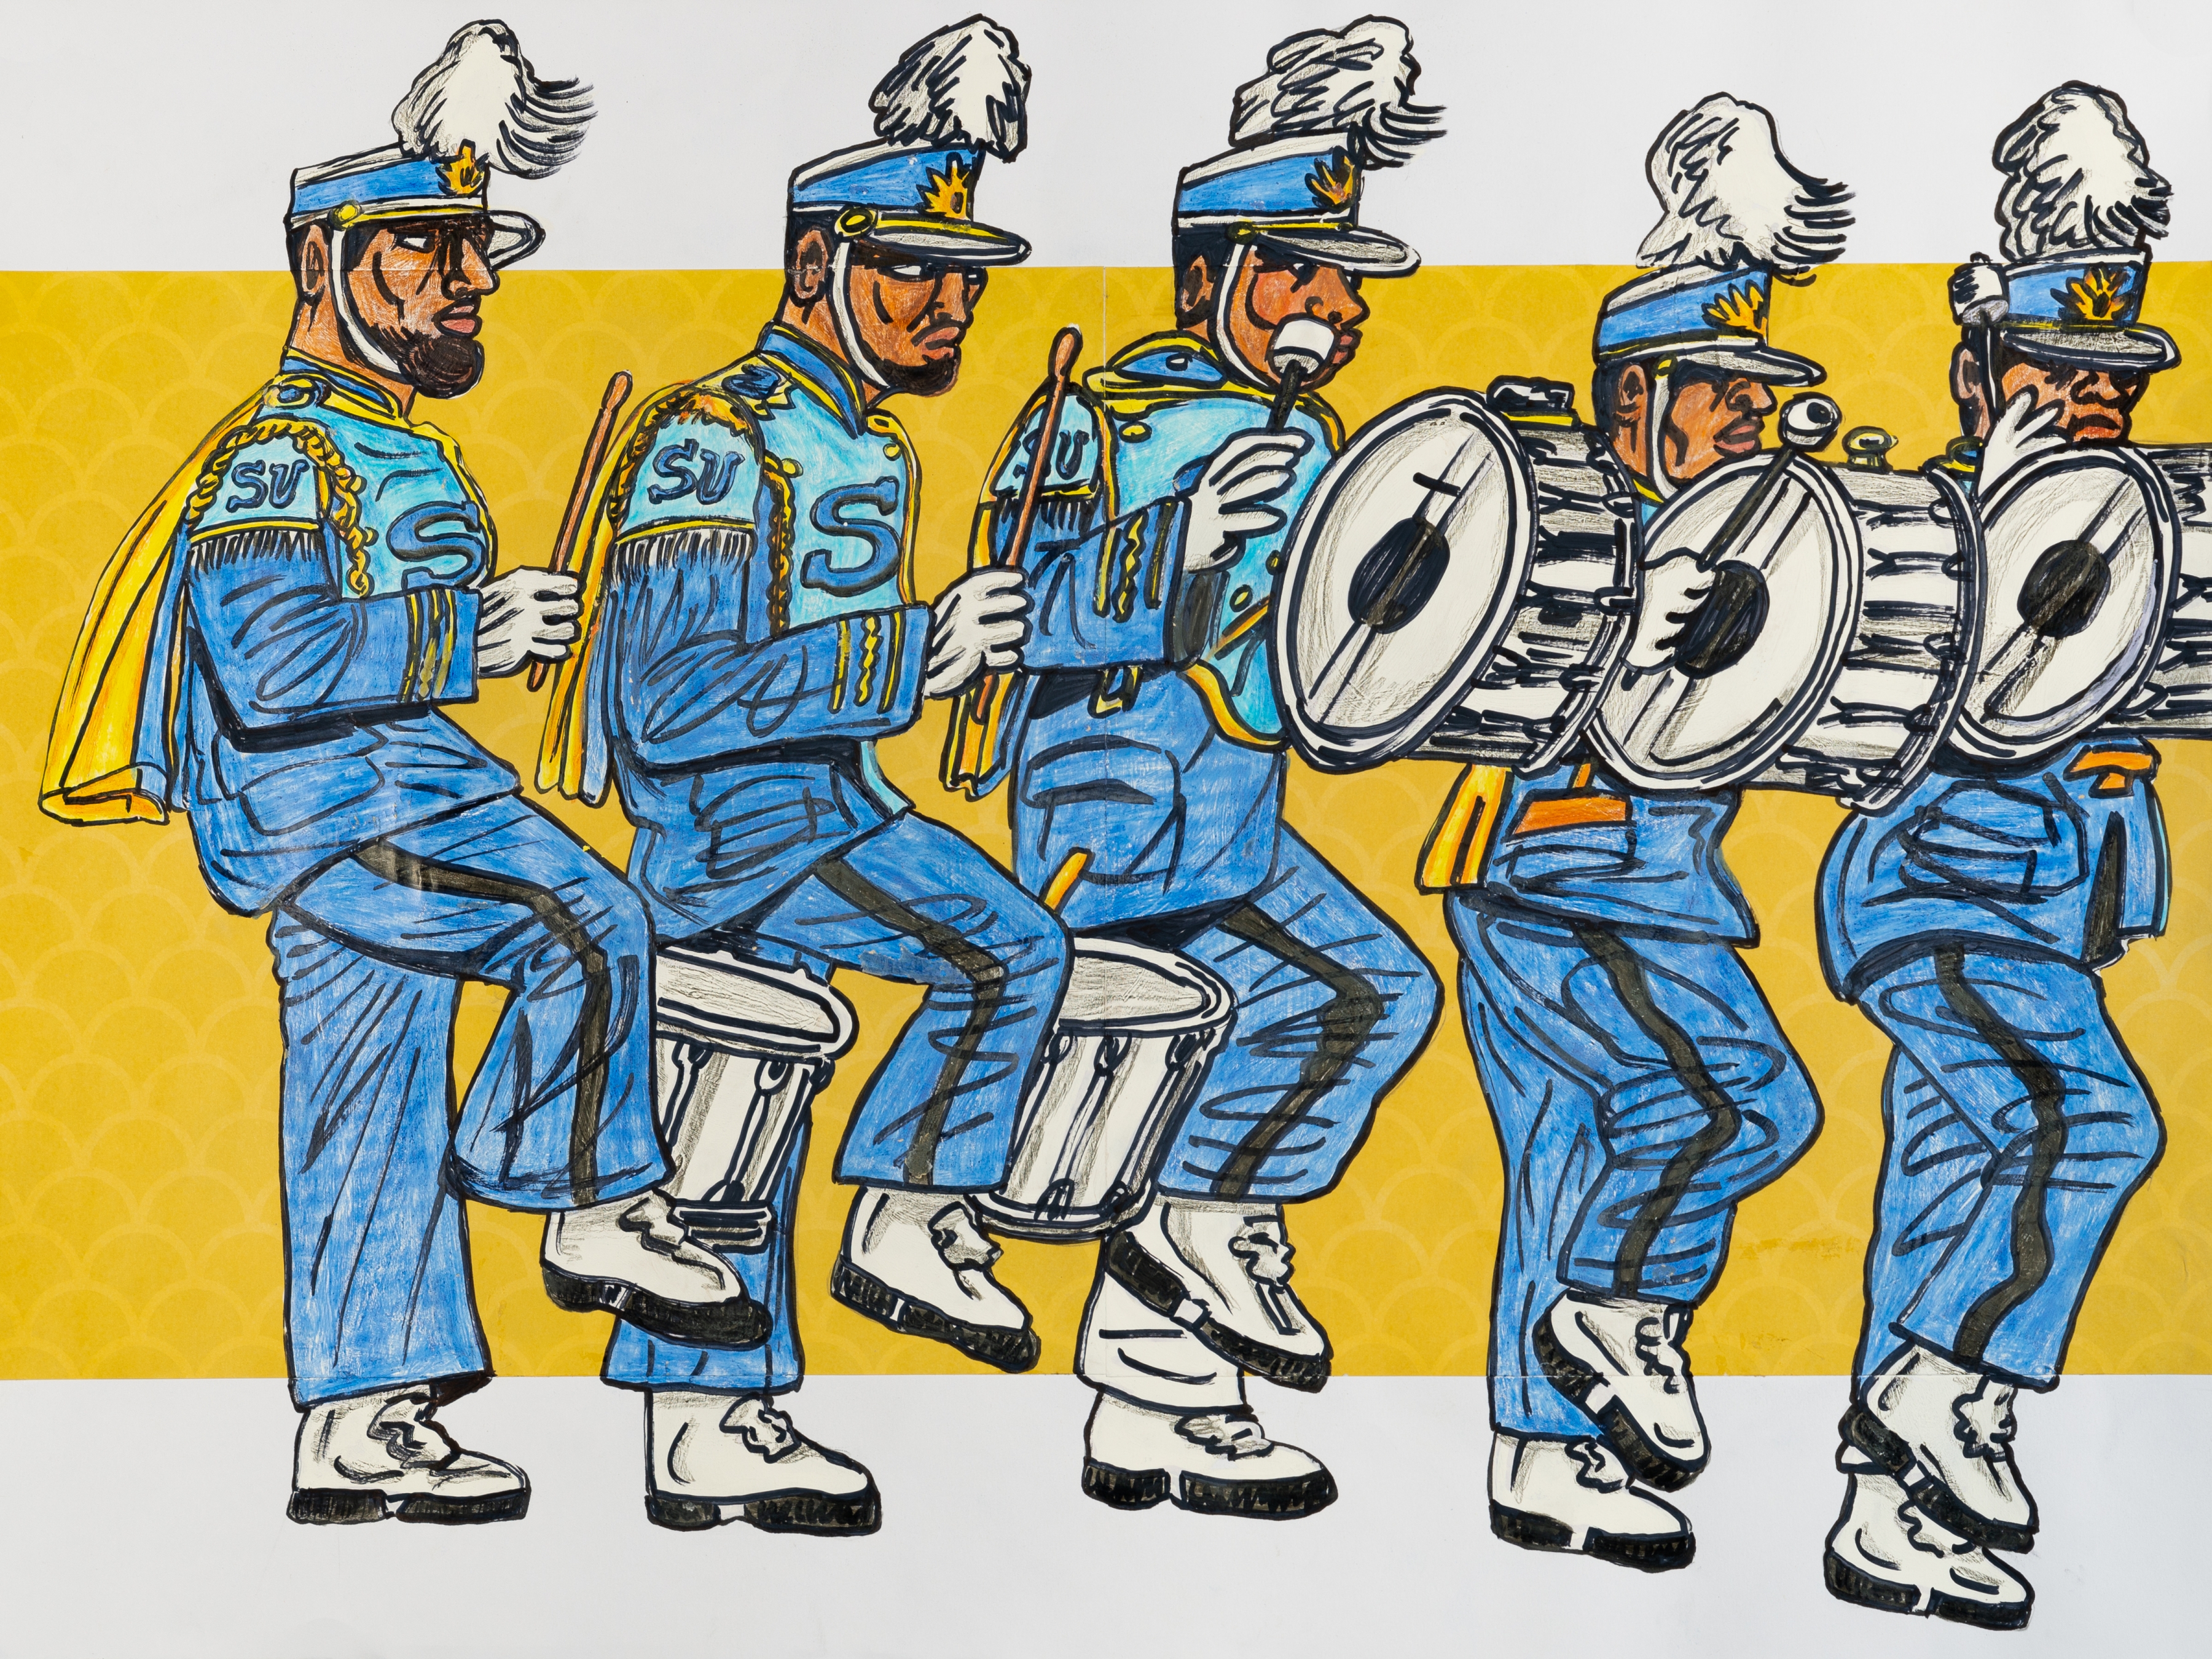 Keith Duncan, Southern Drum Line 1, 2020
18 x 24 inches